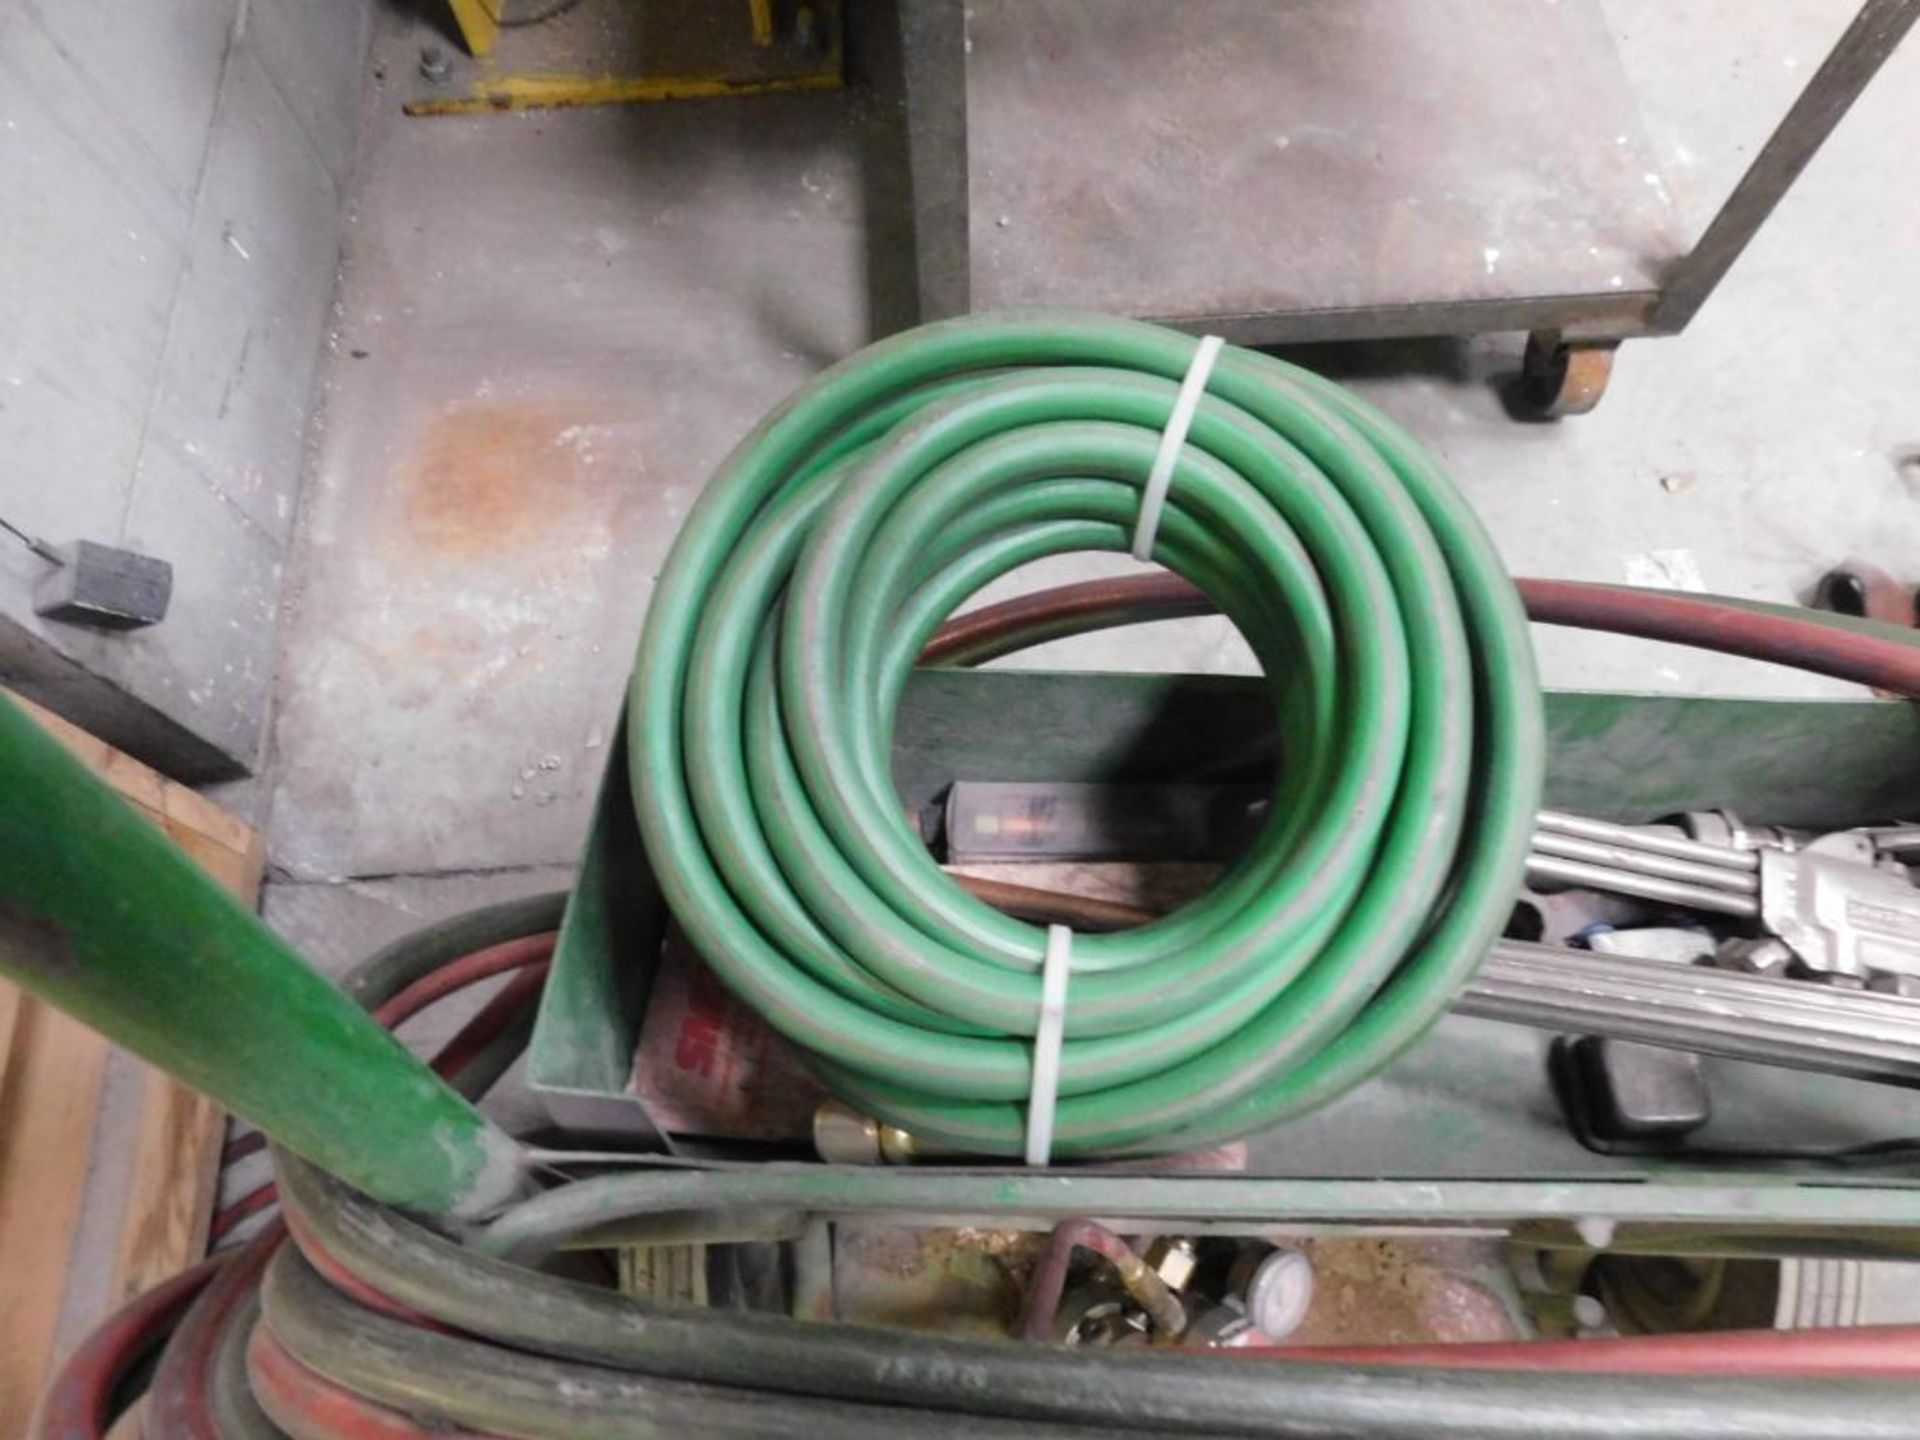 LOT: Torch Cart with Hose & Burner, Spare Hose, Regulator, with Torch Attachment - Image 4 of 5